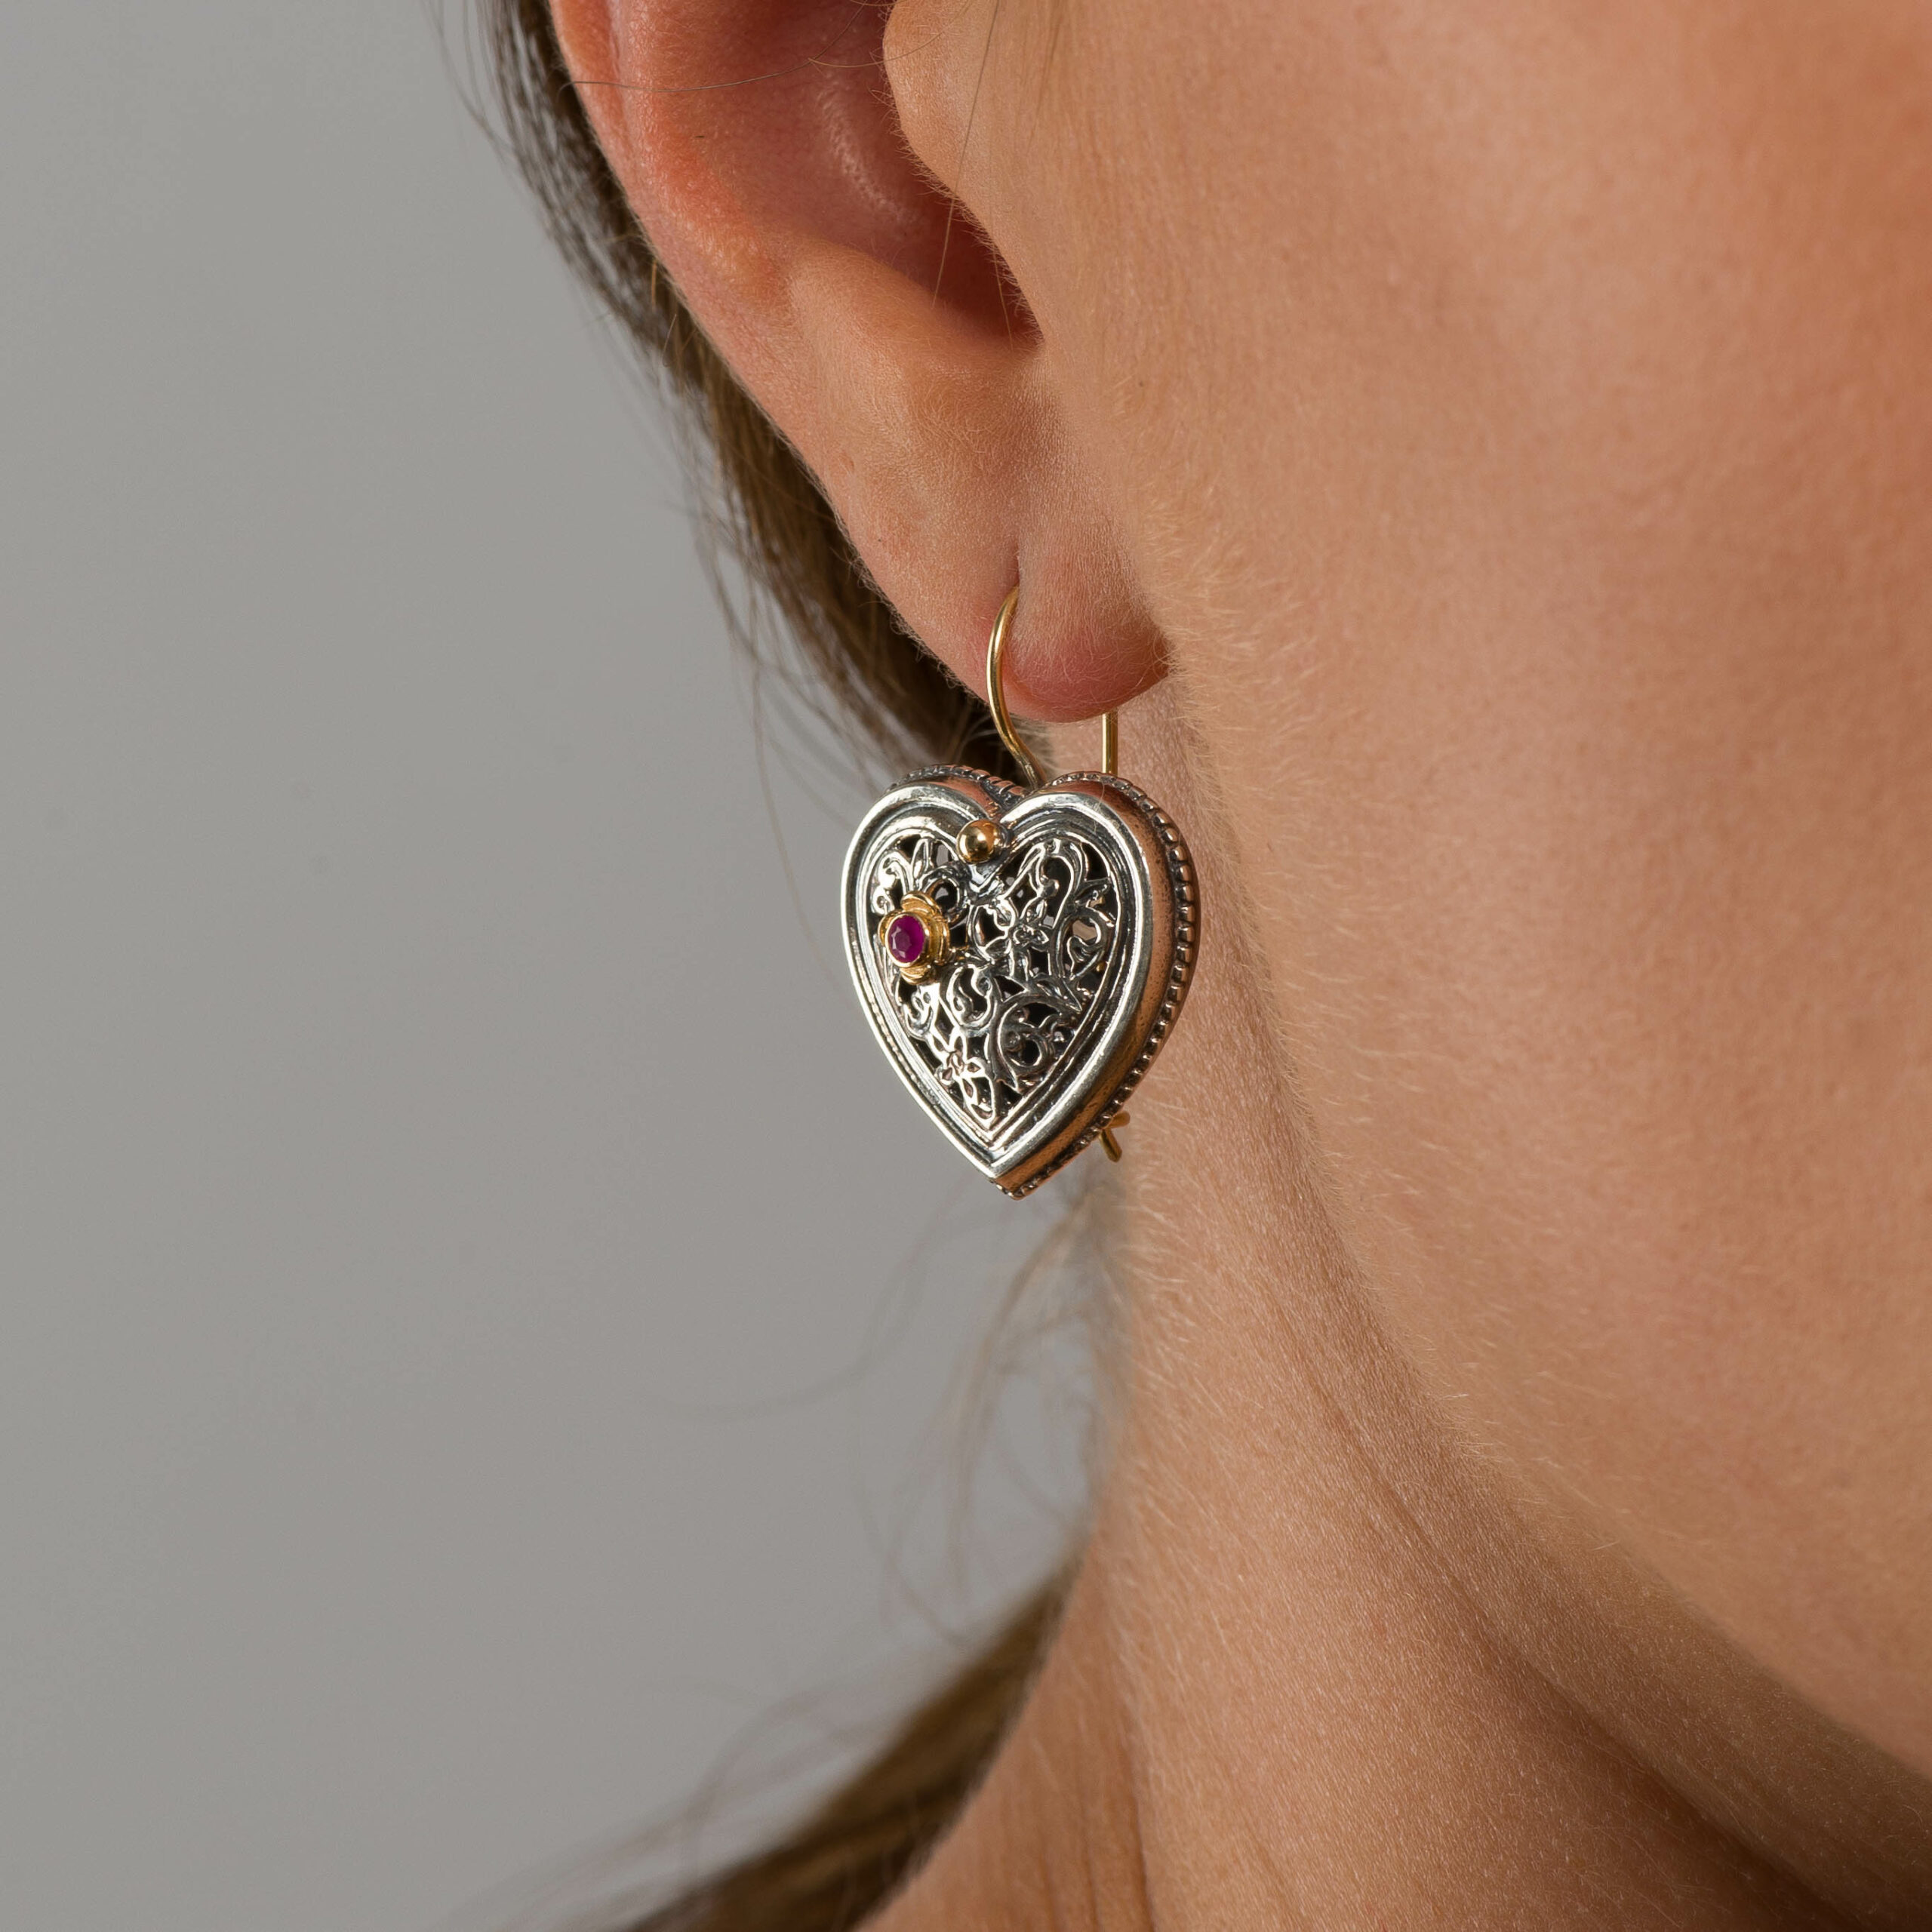 Garden Shadows Heart Earrings in 18K Gold and Sterling Silver with Ruby